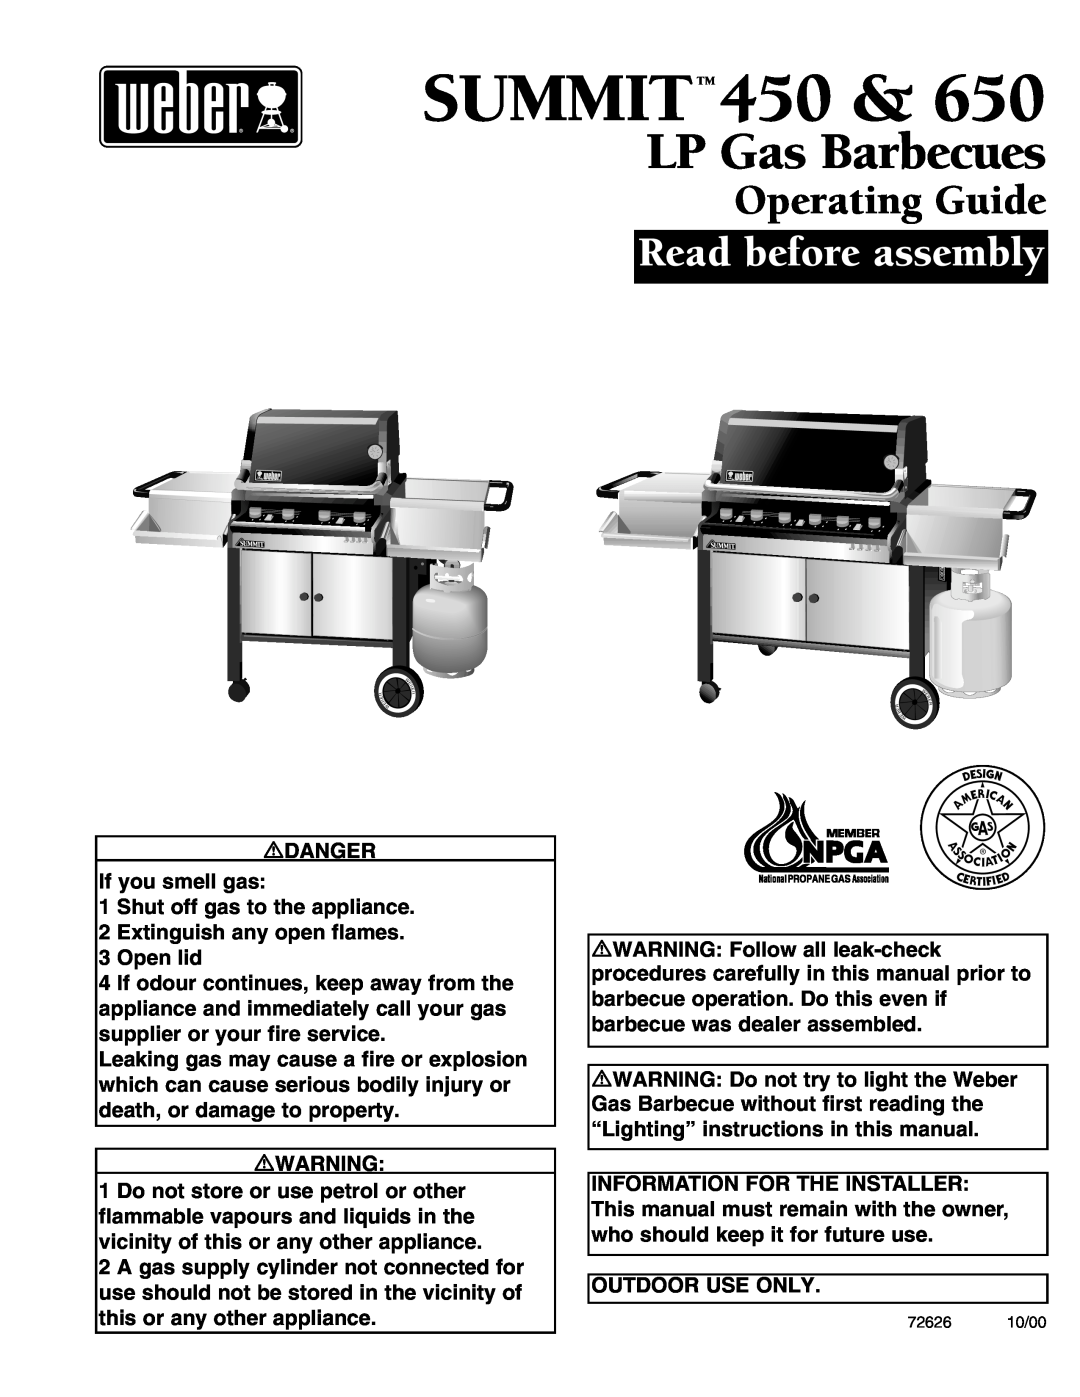 Weber 650 manual DANGER If you smell gas, Shut off gas to the appliance, Extinguish any open flames 3 Open lid, Summittm 